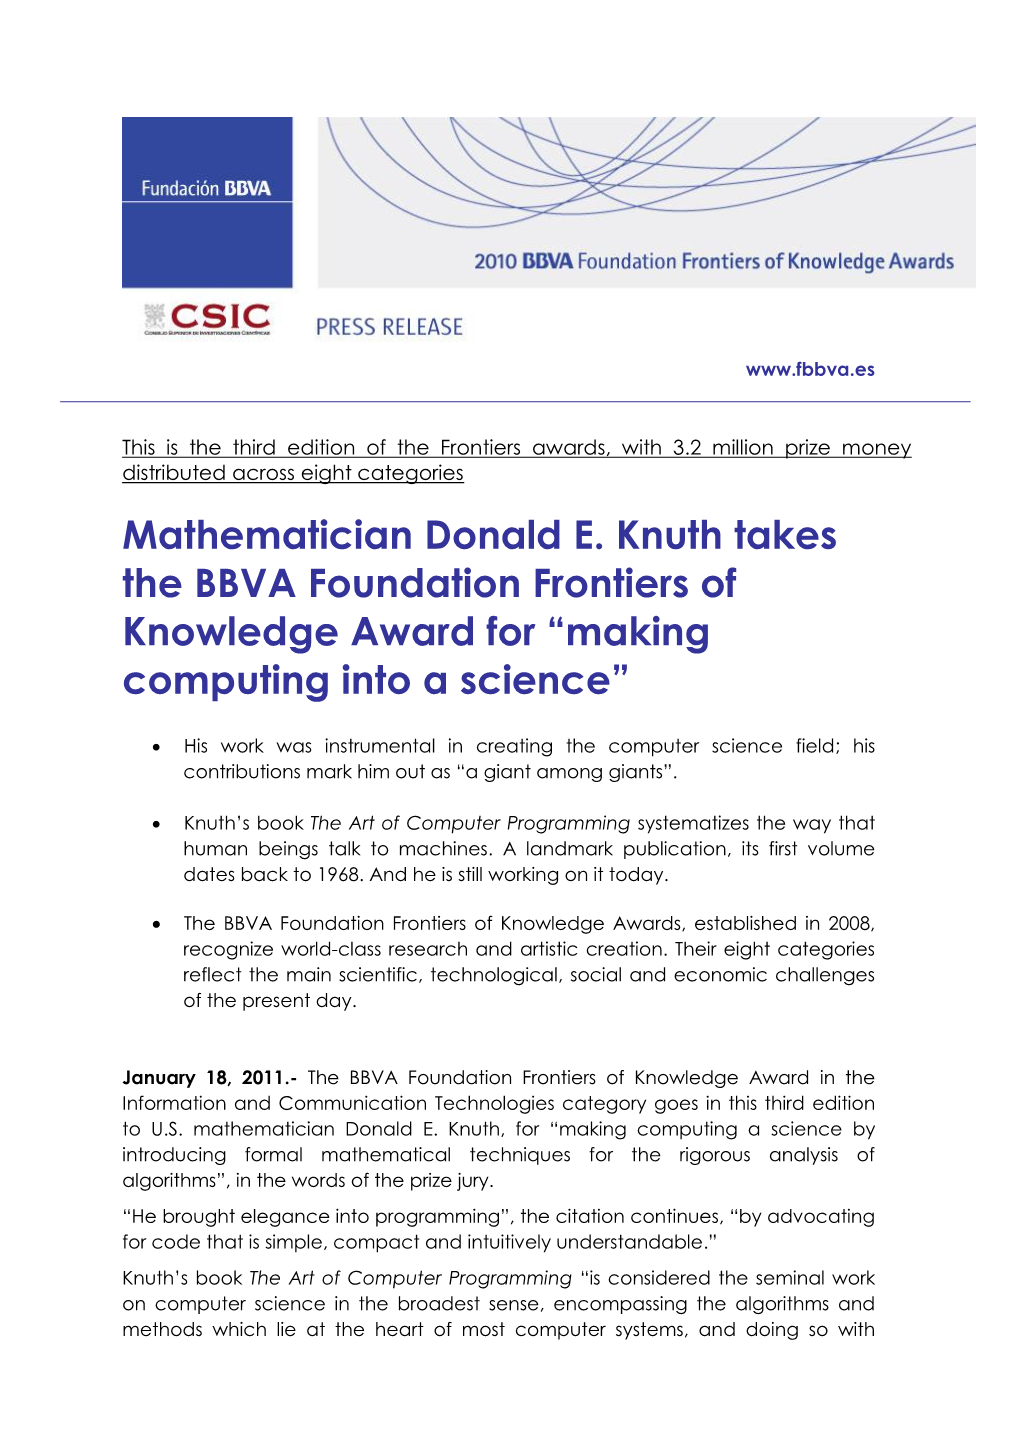 Mathematician Donald E. Knuth Takes the BBVA Foundation Frontiers of Knowledge Award for “Making Computing Into a Science”